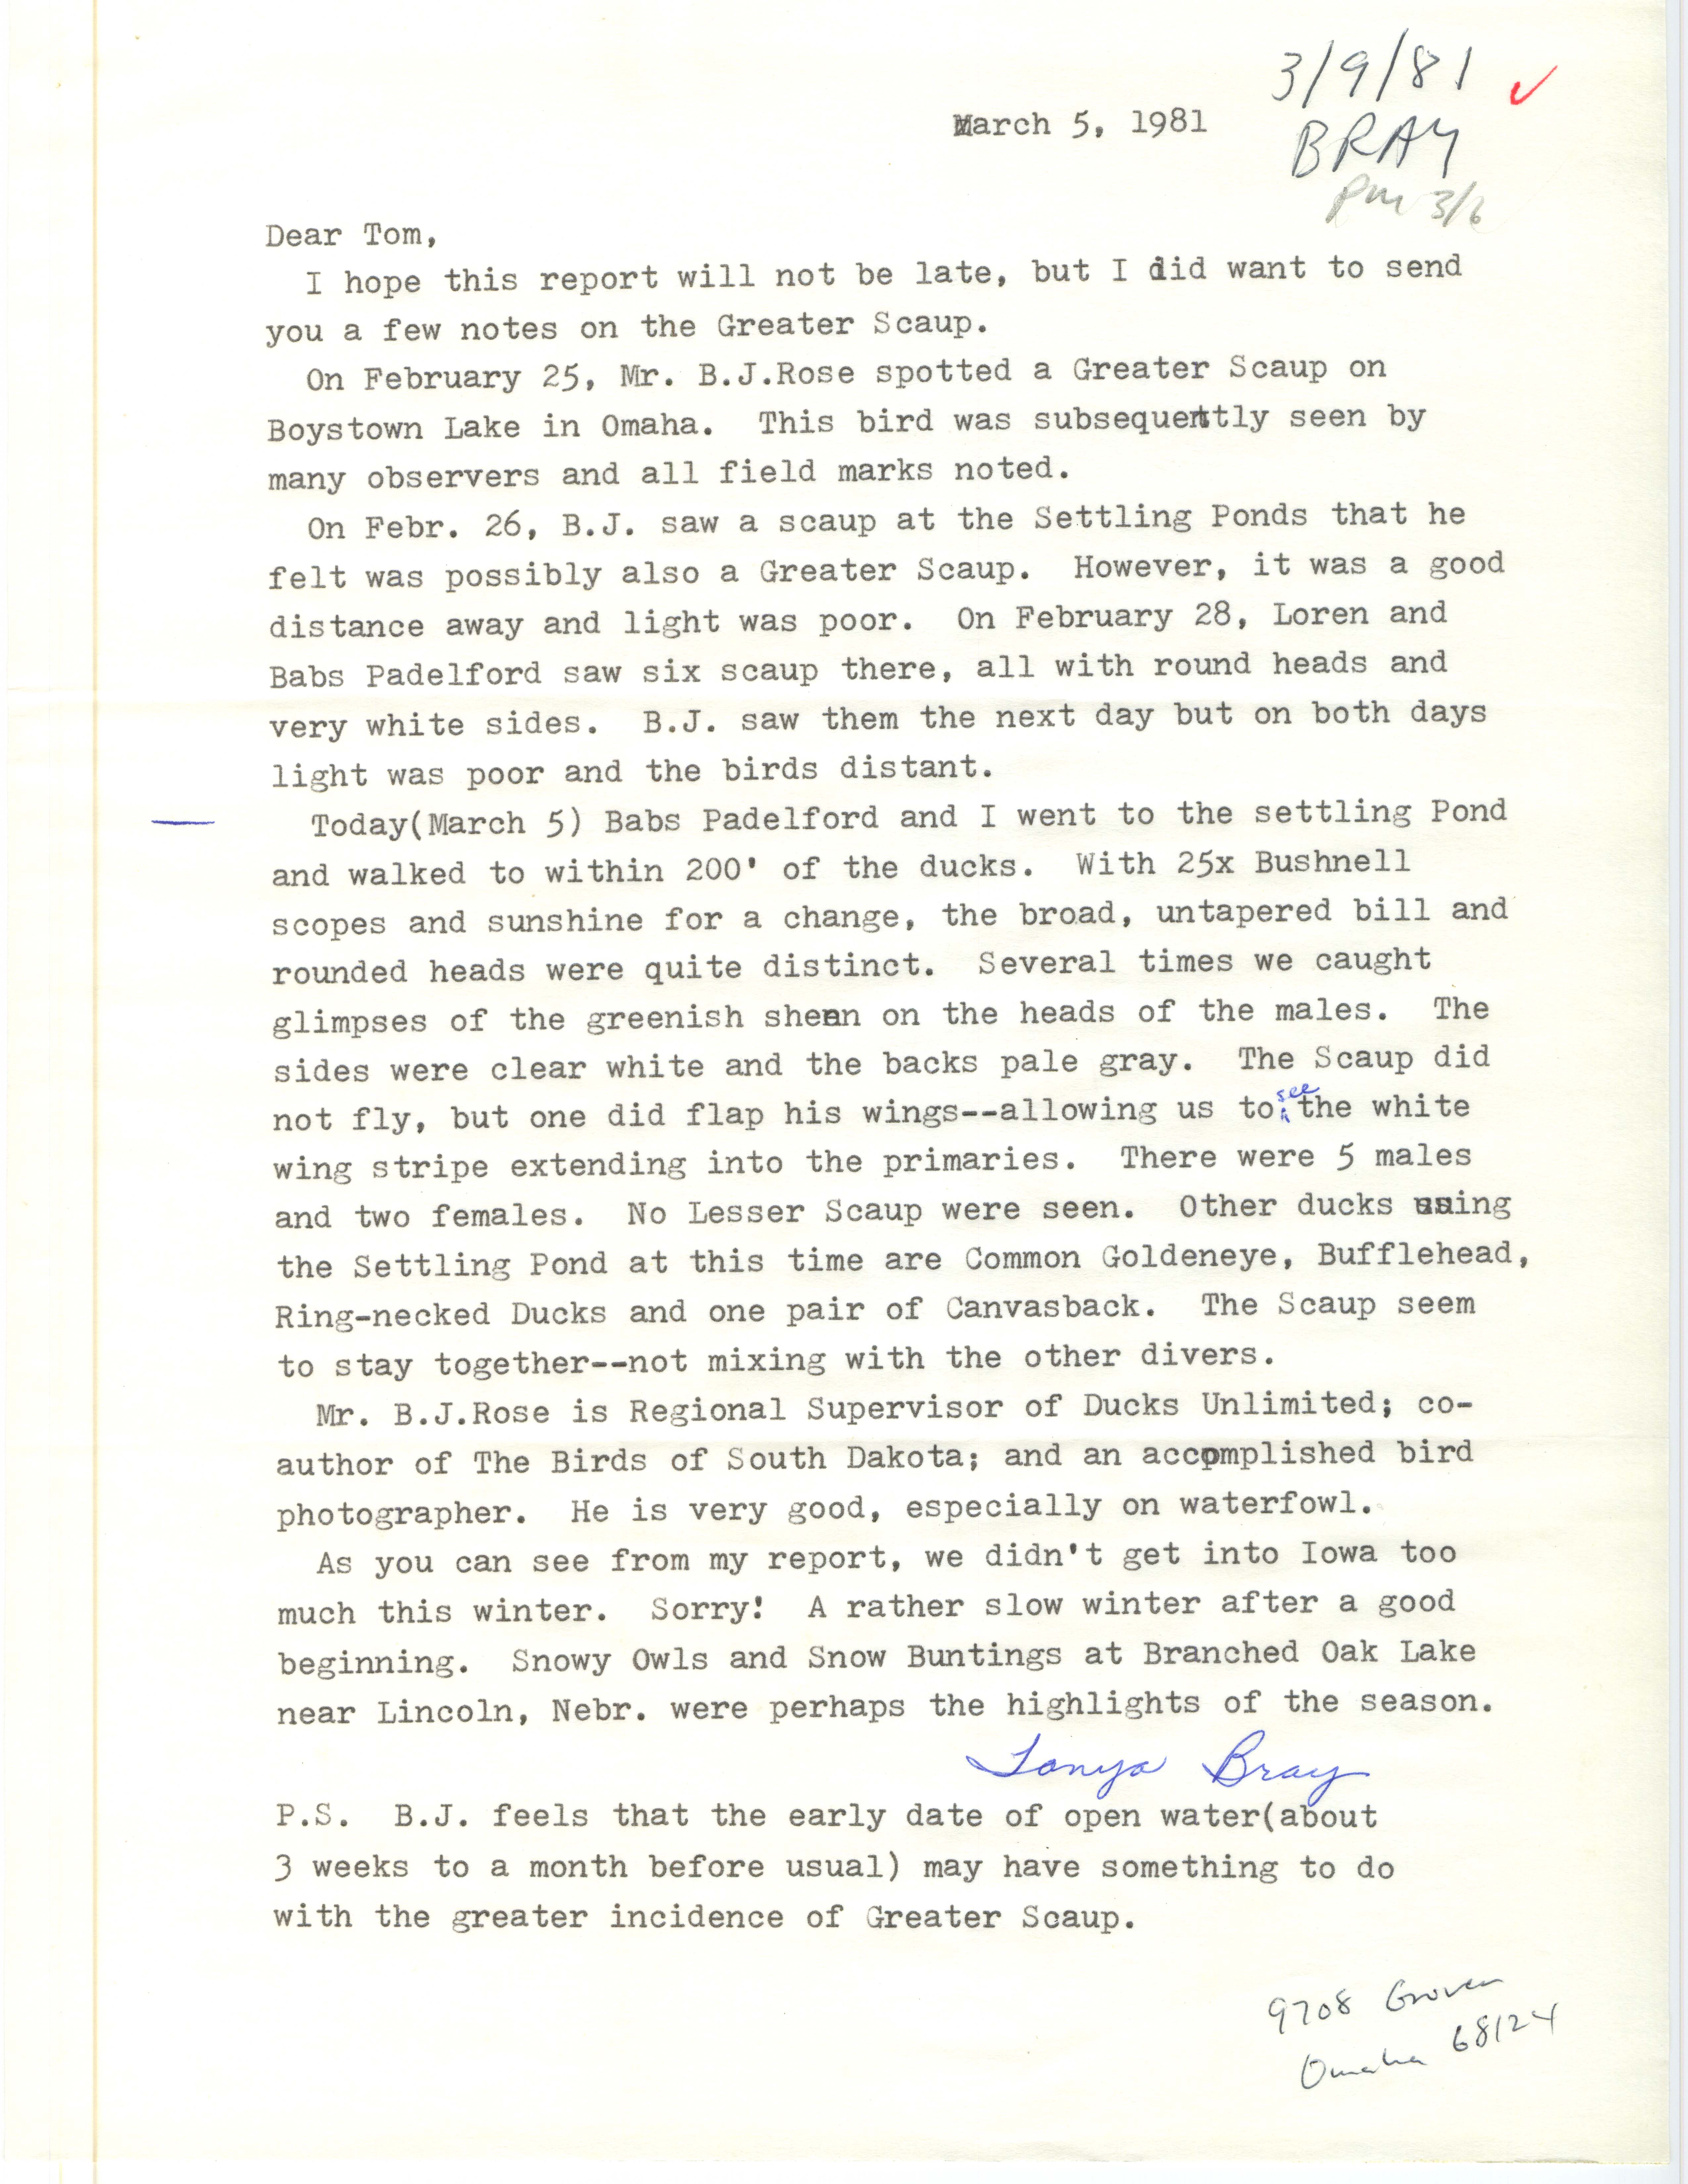 Tanya Bray letter to Thomas Kent regarding the Greater Scaup and other winter sightings, March 5, 1981